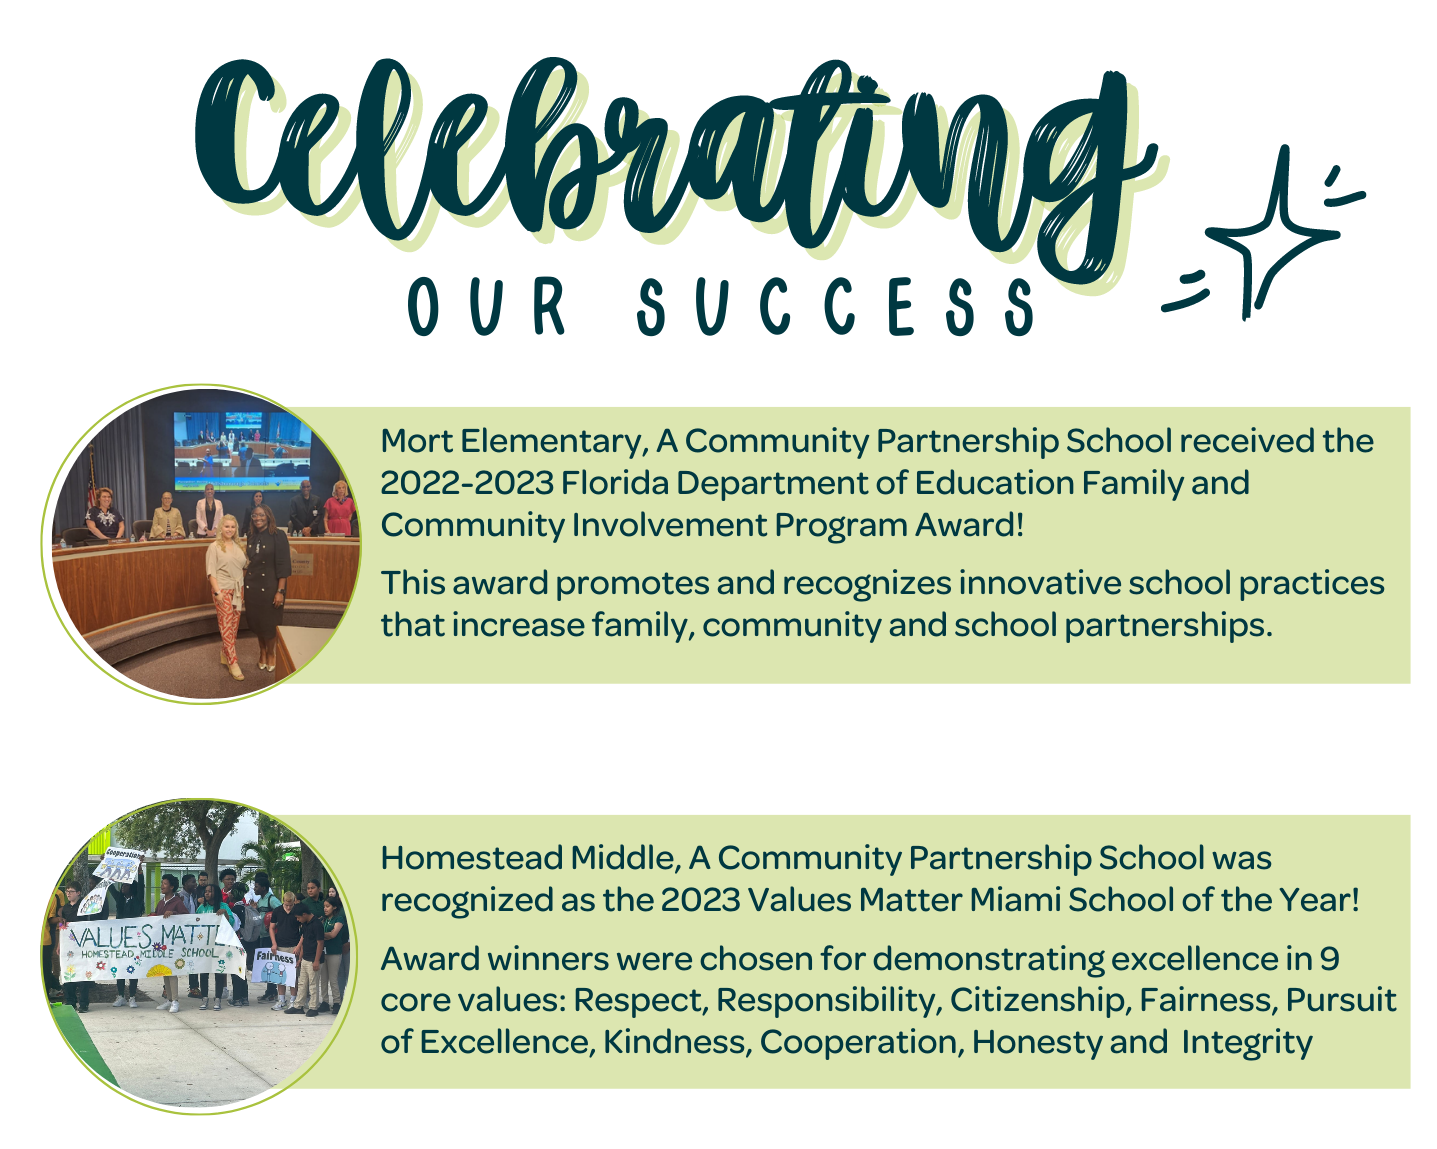 Celebrating Our Success. Mort Elementary, A Community Partnership School received the 2022-2023 Florida Department of Education Family and Community Involvement Program Award. This award promotes and recognizes innovative school practices that increase family, community, and school partnerships. Homestead Middle, A Community Partnership was recognized as the 2023 Values Matter Miami School of the Year. Award winners were chosen for demonstrating excellence in 9 core values: Respect, Responsibility, Citizenship, Fairness, Pursuit of Excellence, Kindness, Cooperation, Honesty, and Integrity. 